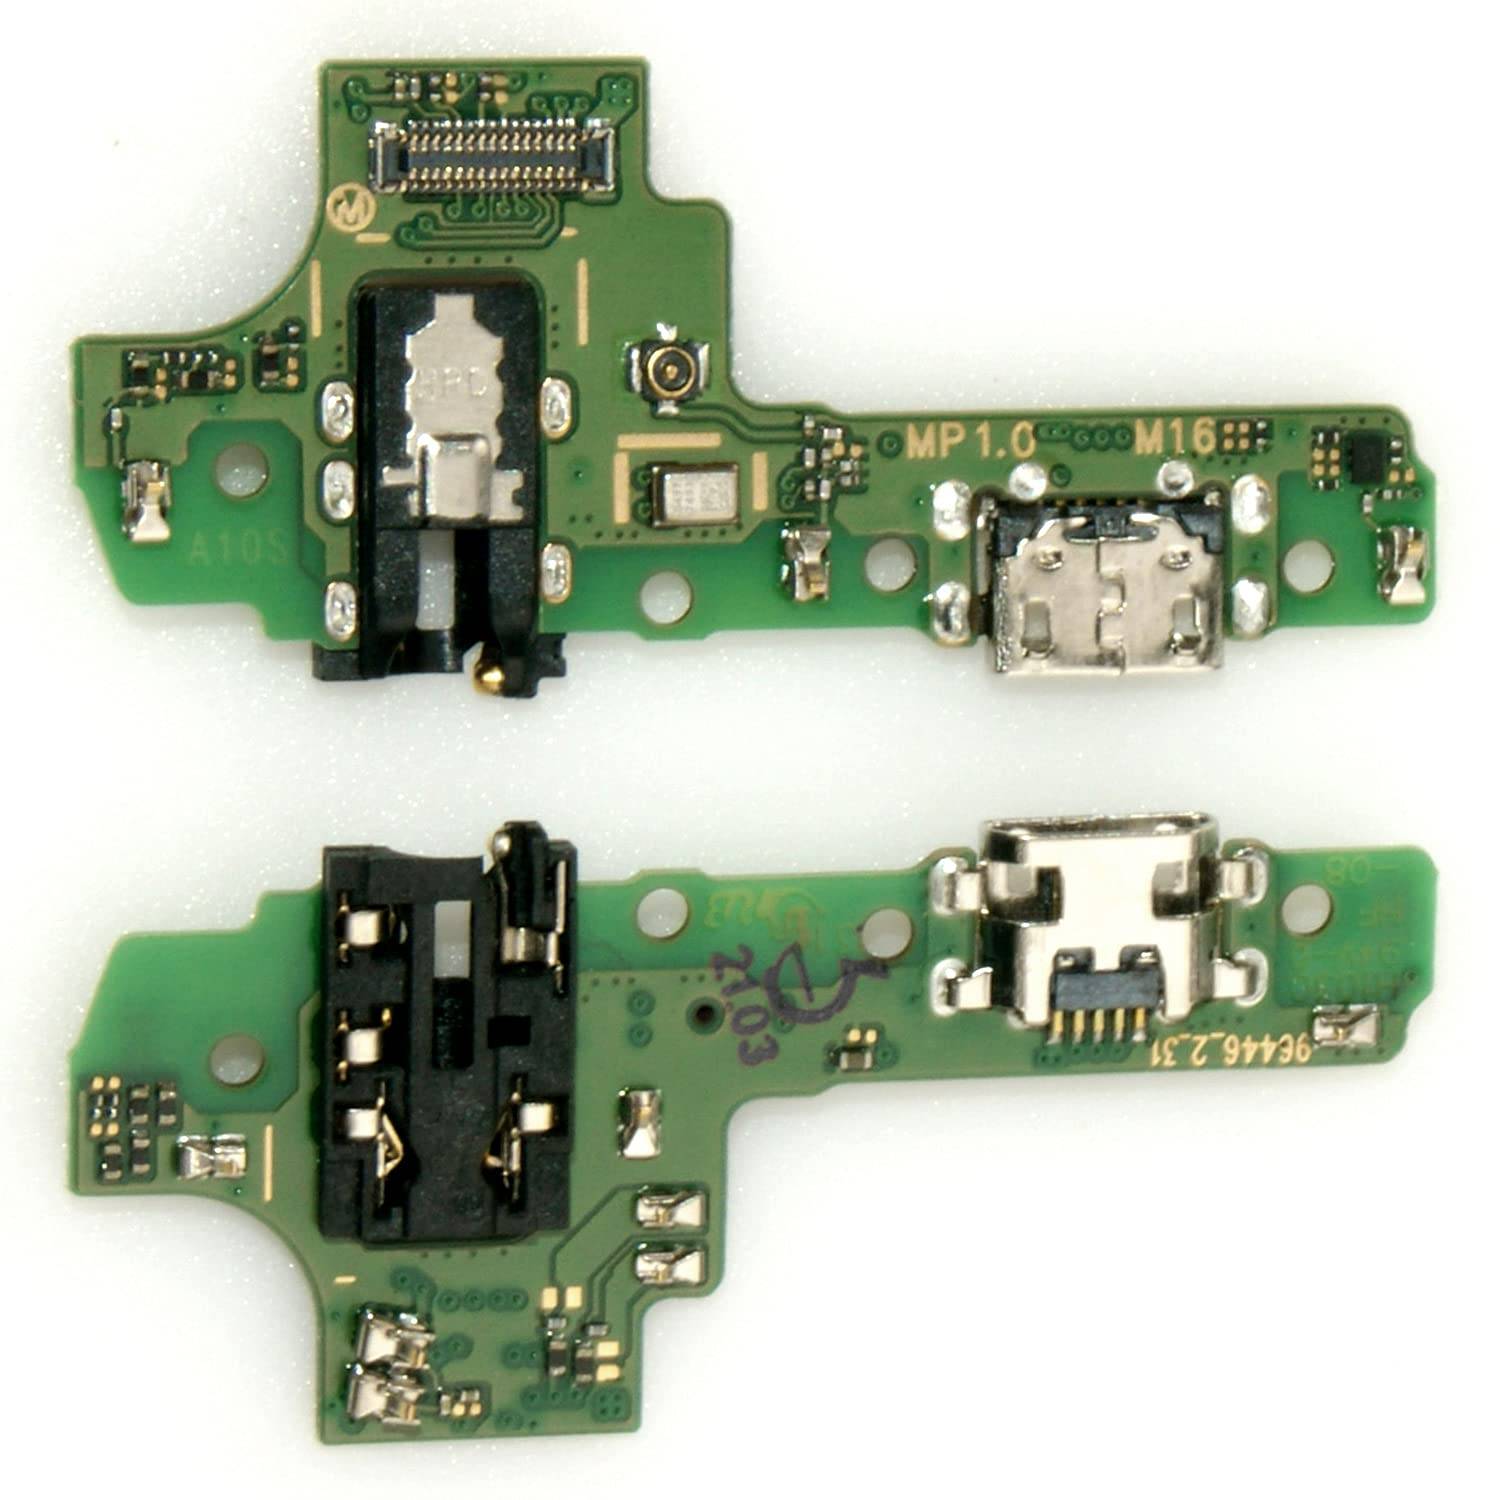 CHARGER BOARD SAMSUNG A10S SM-A107 M16